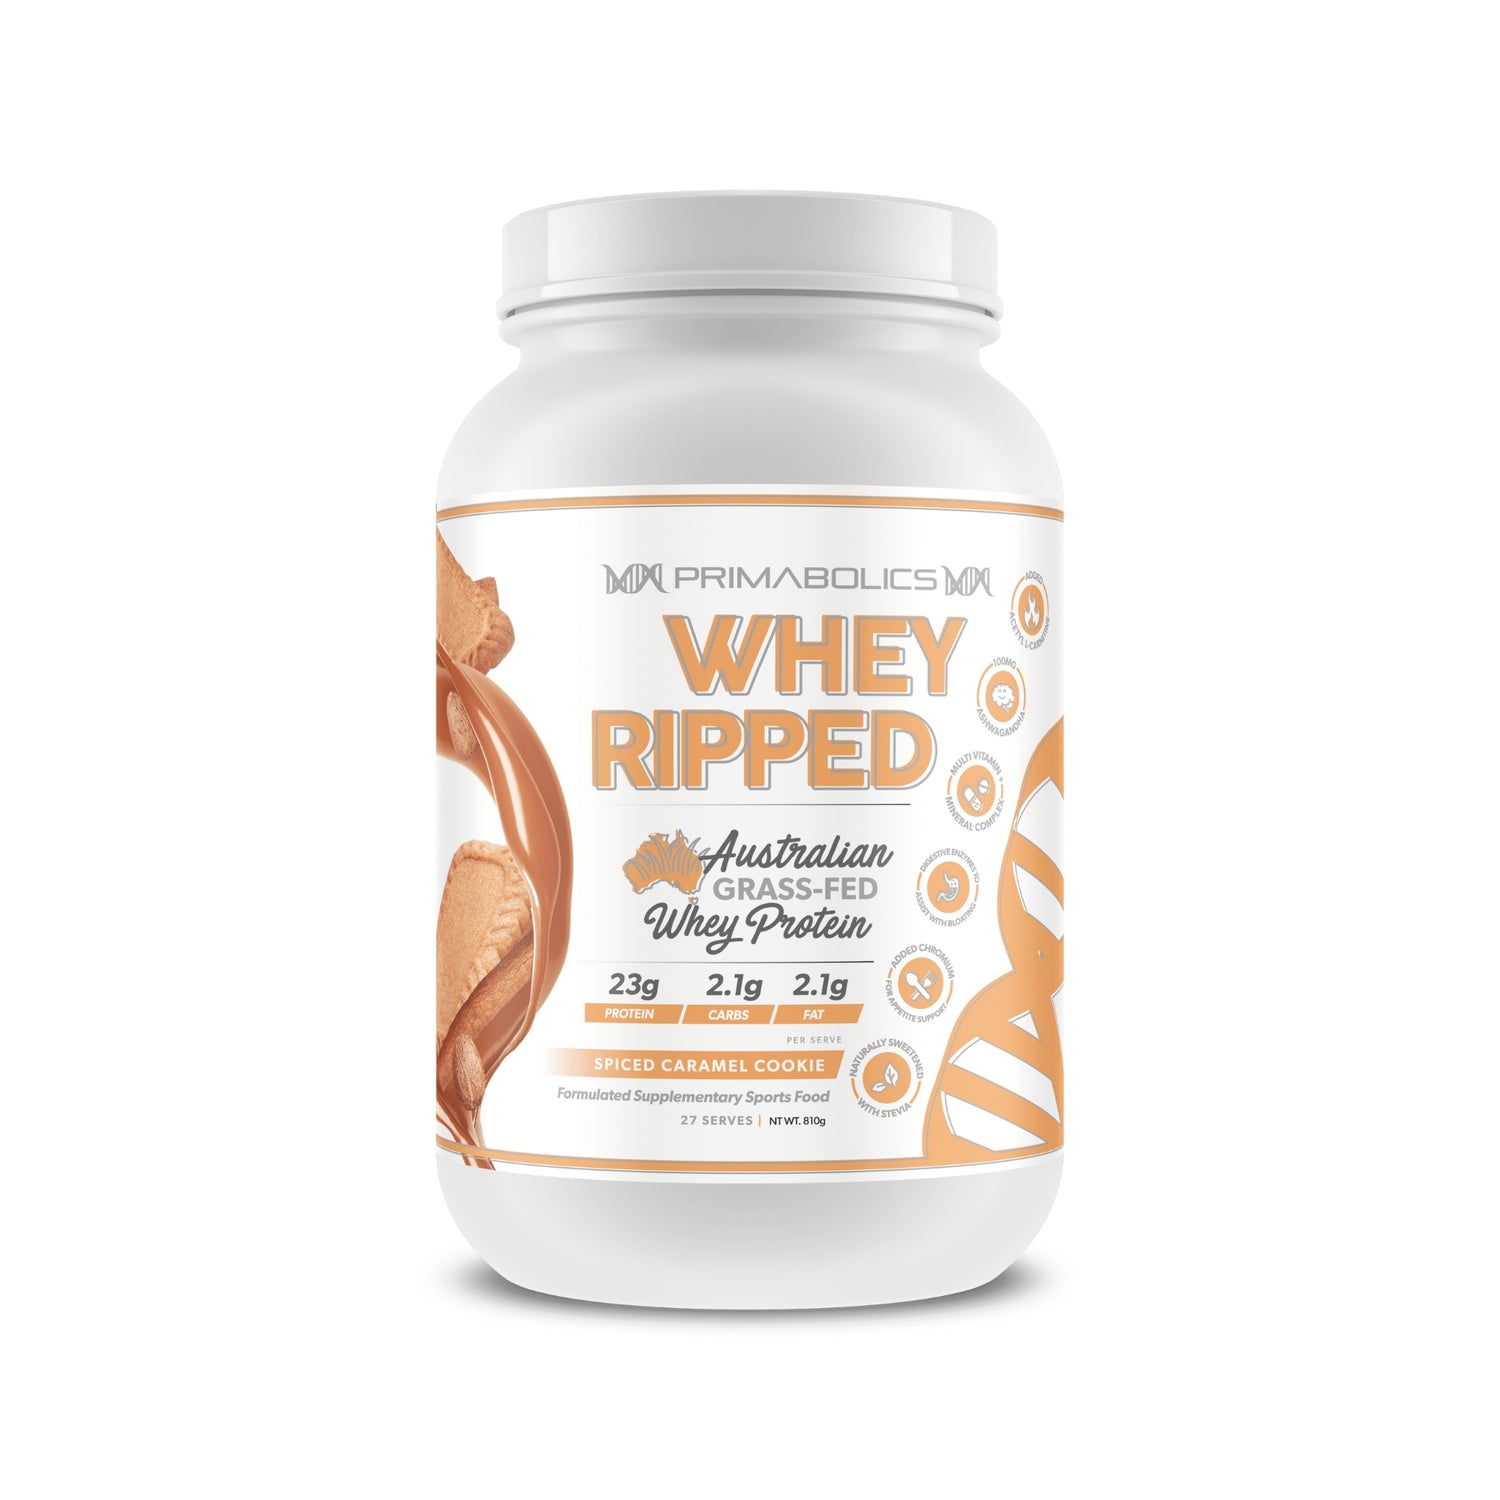 Primabolics Whey Ripped Protein Powder